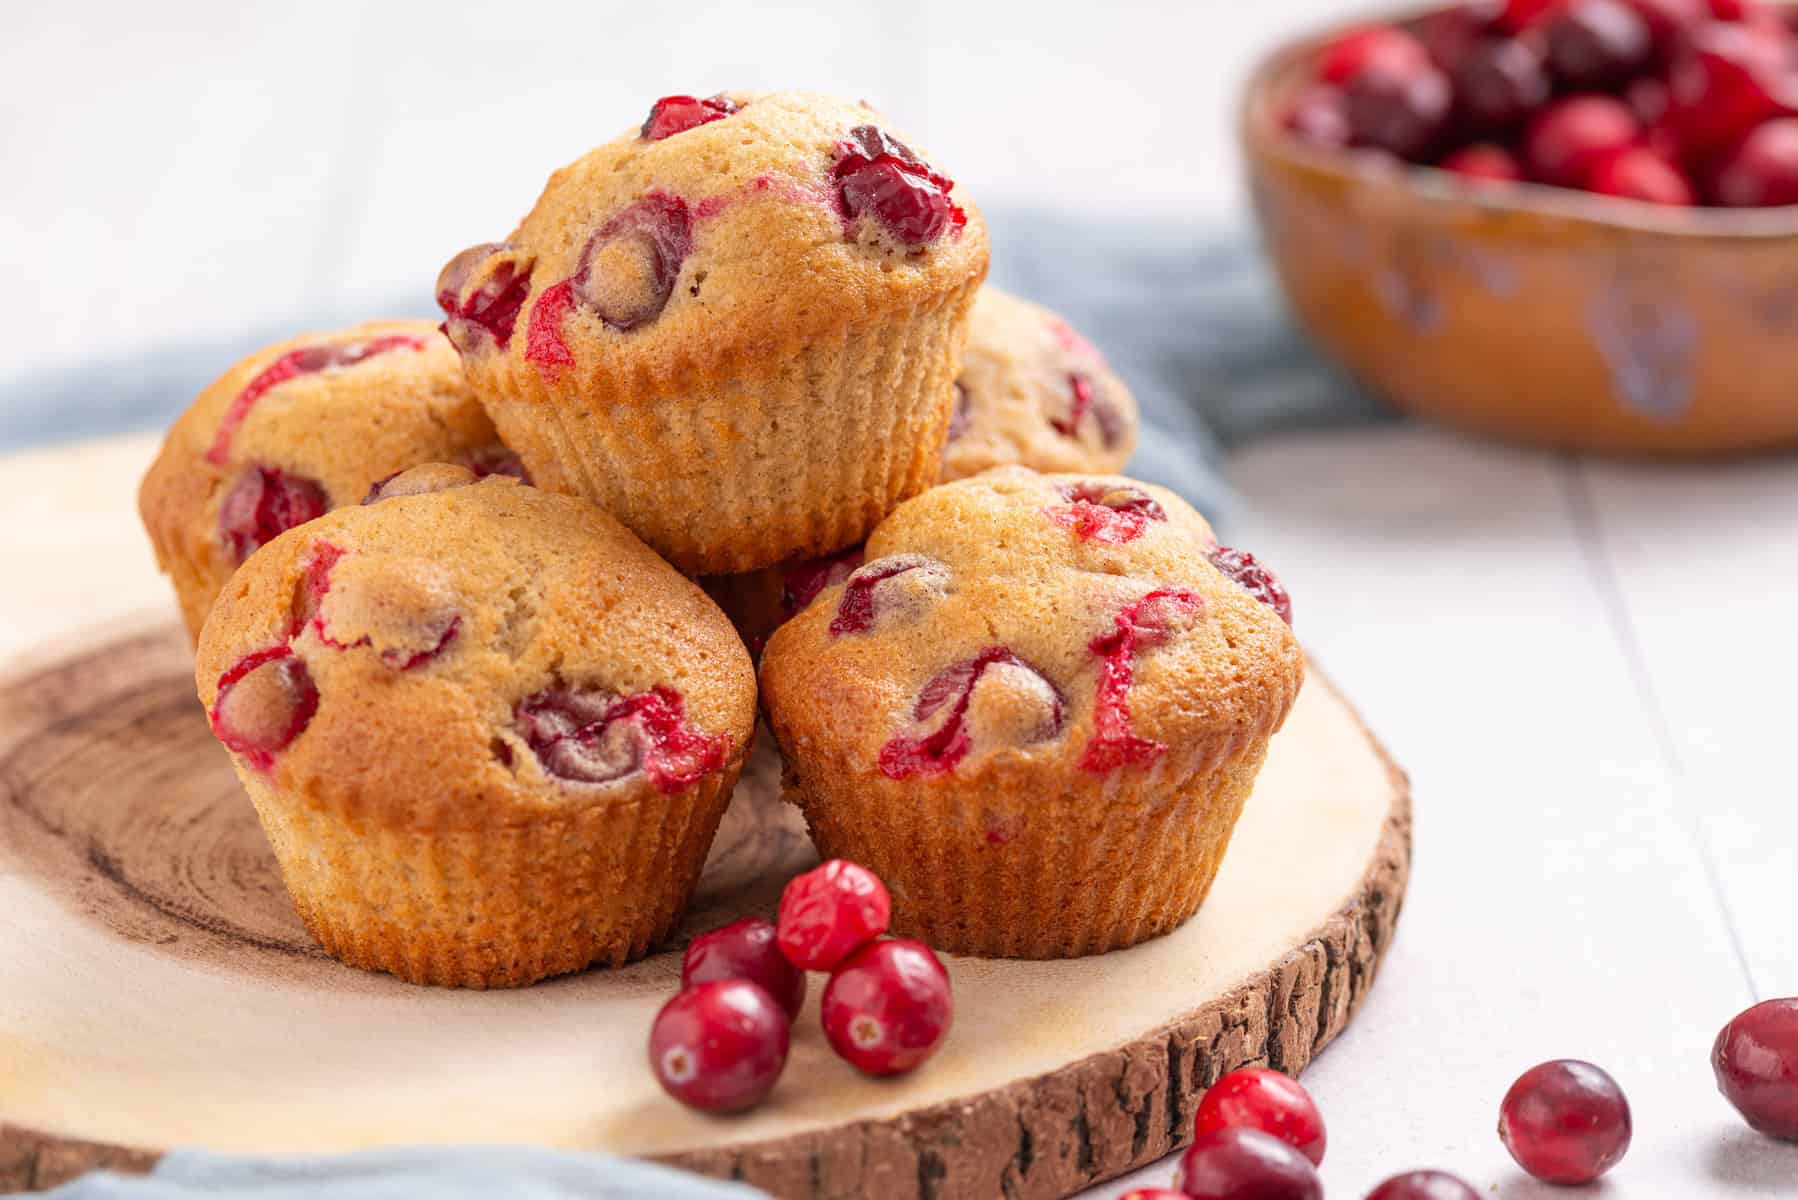 An image of a batch of cranberry orange muffins, one stacked on top of the others, on a wooden serving board.